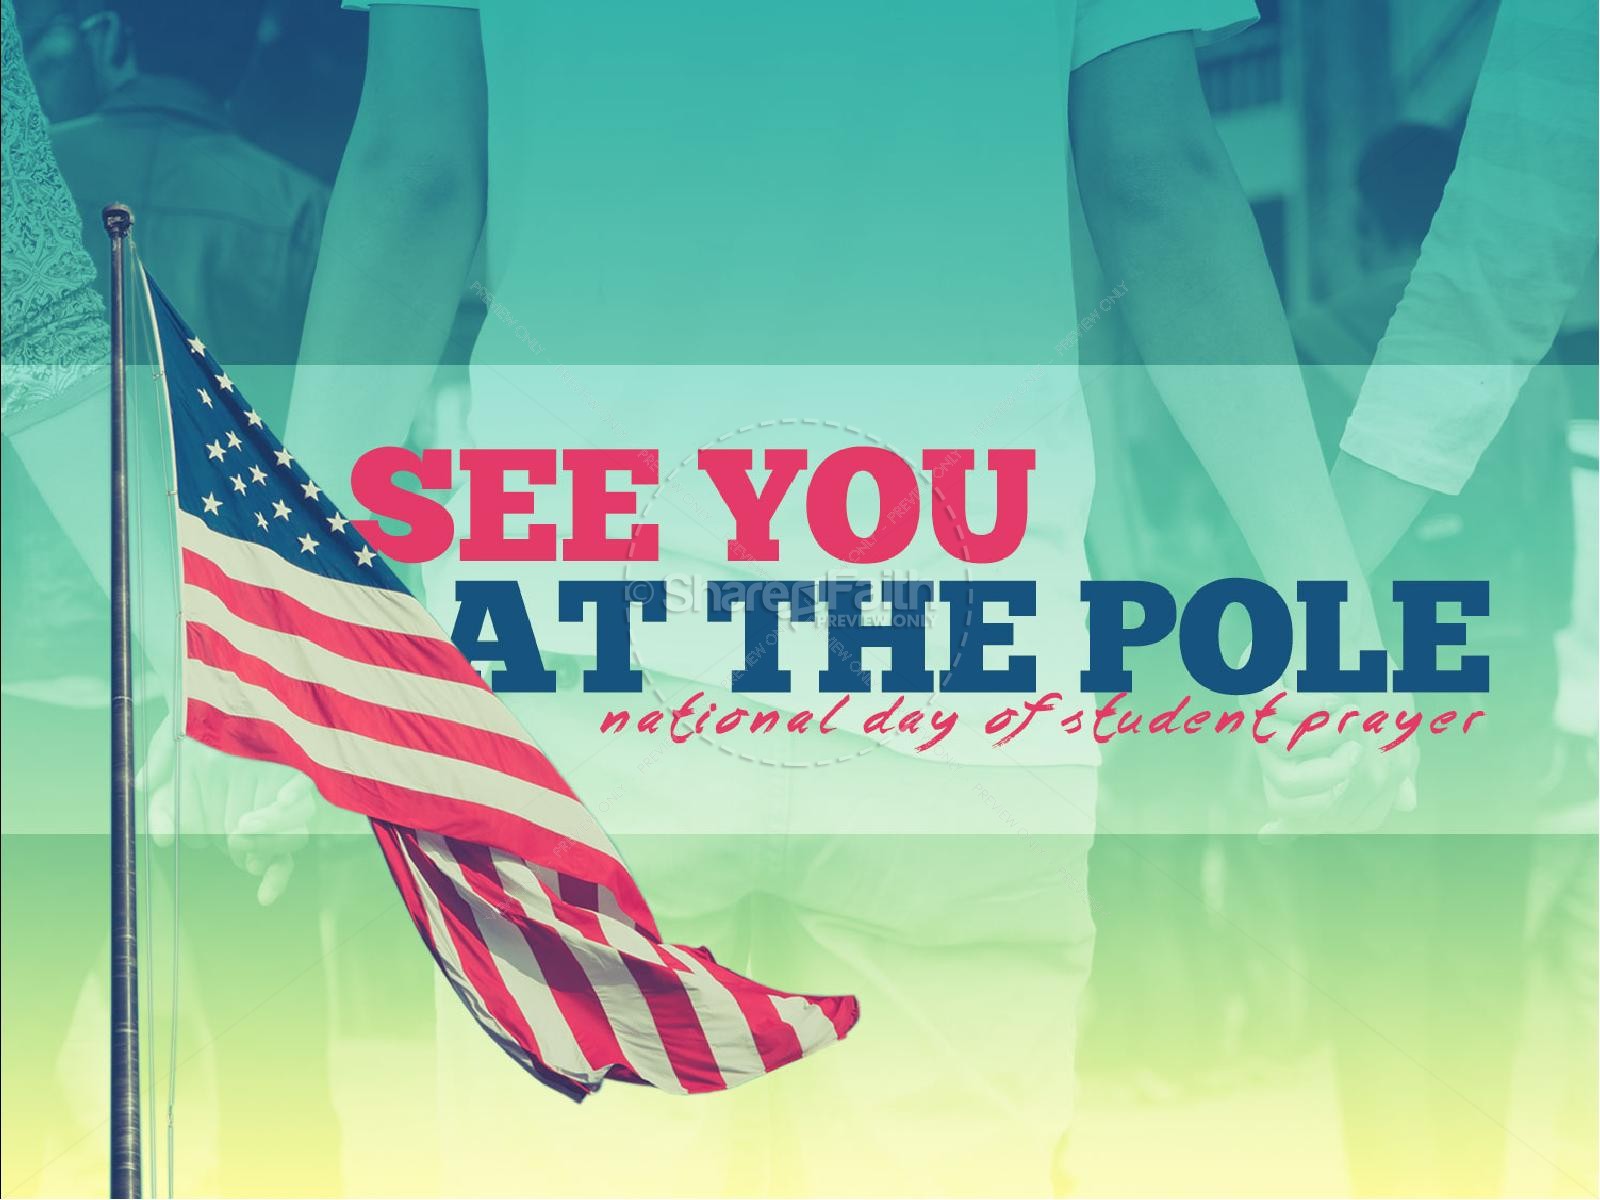 see you at the pole 2013 clipart - photo #6